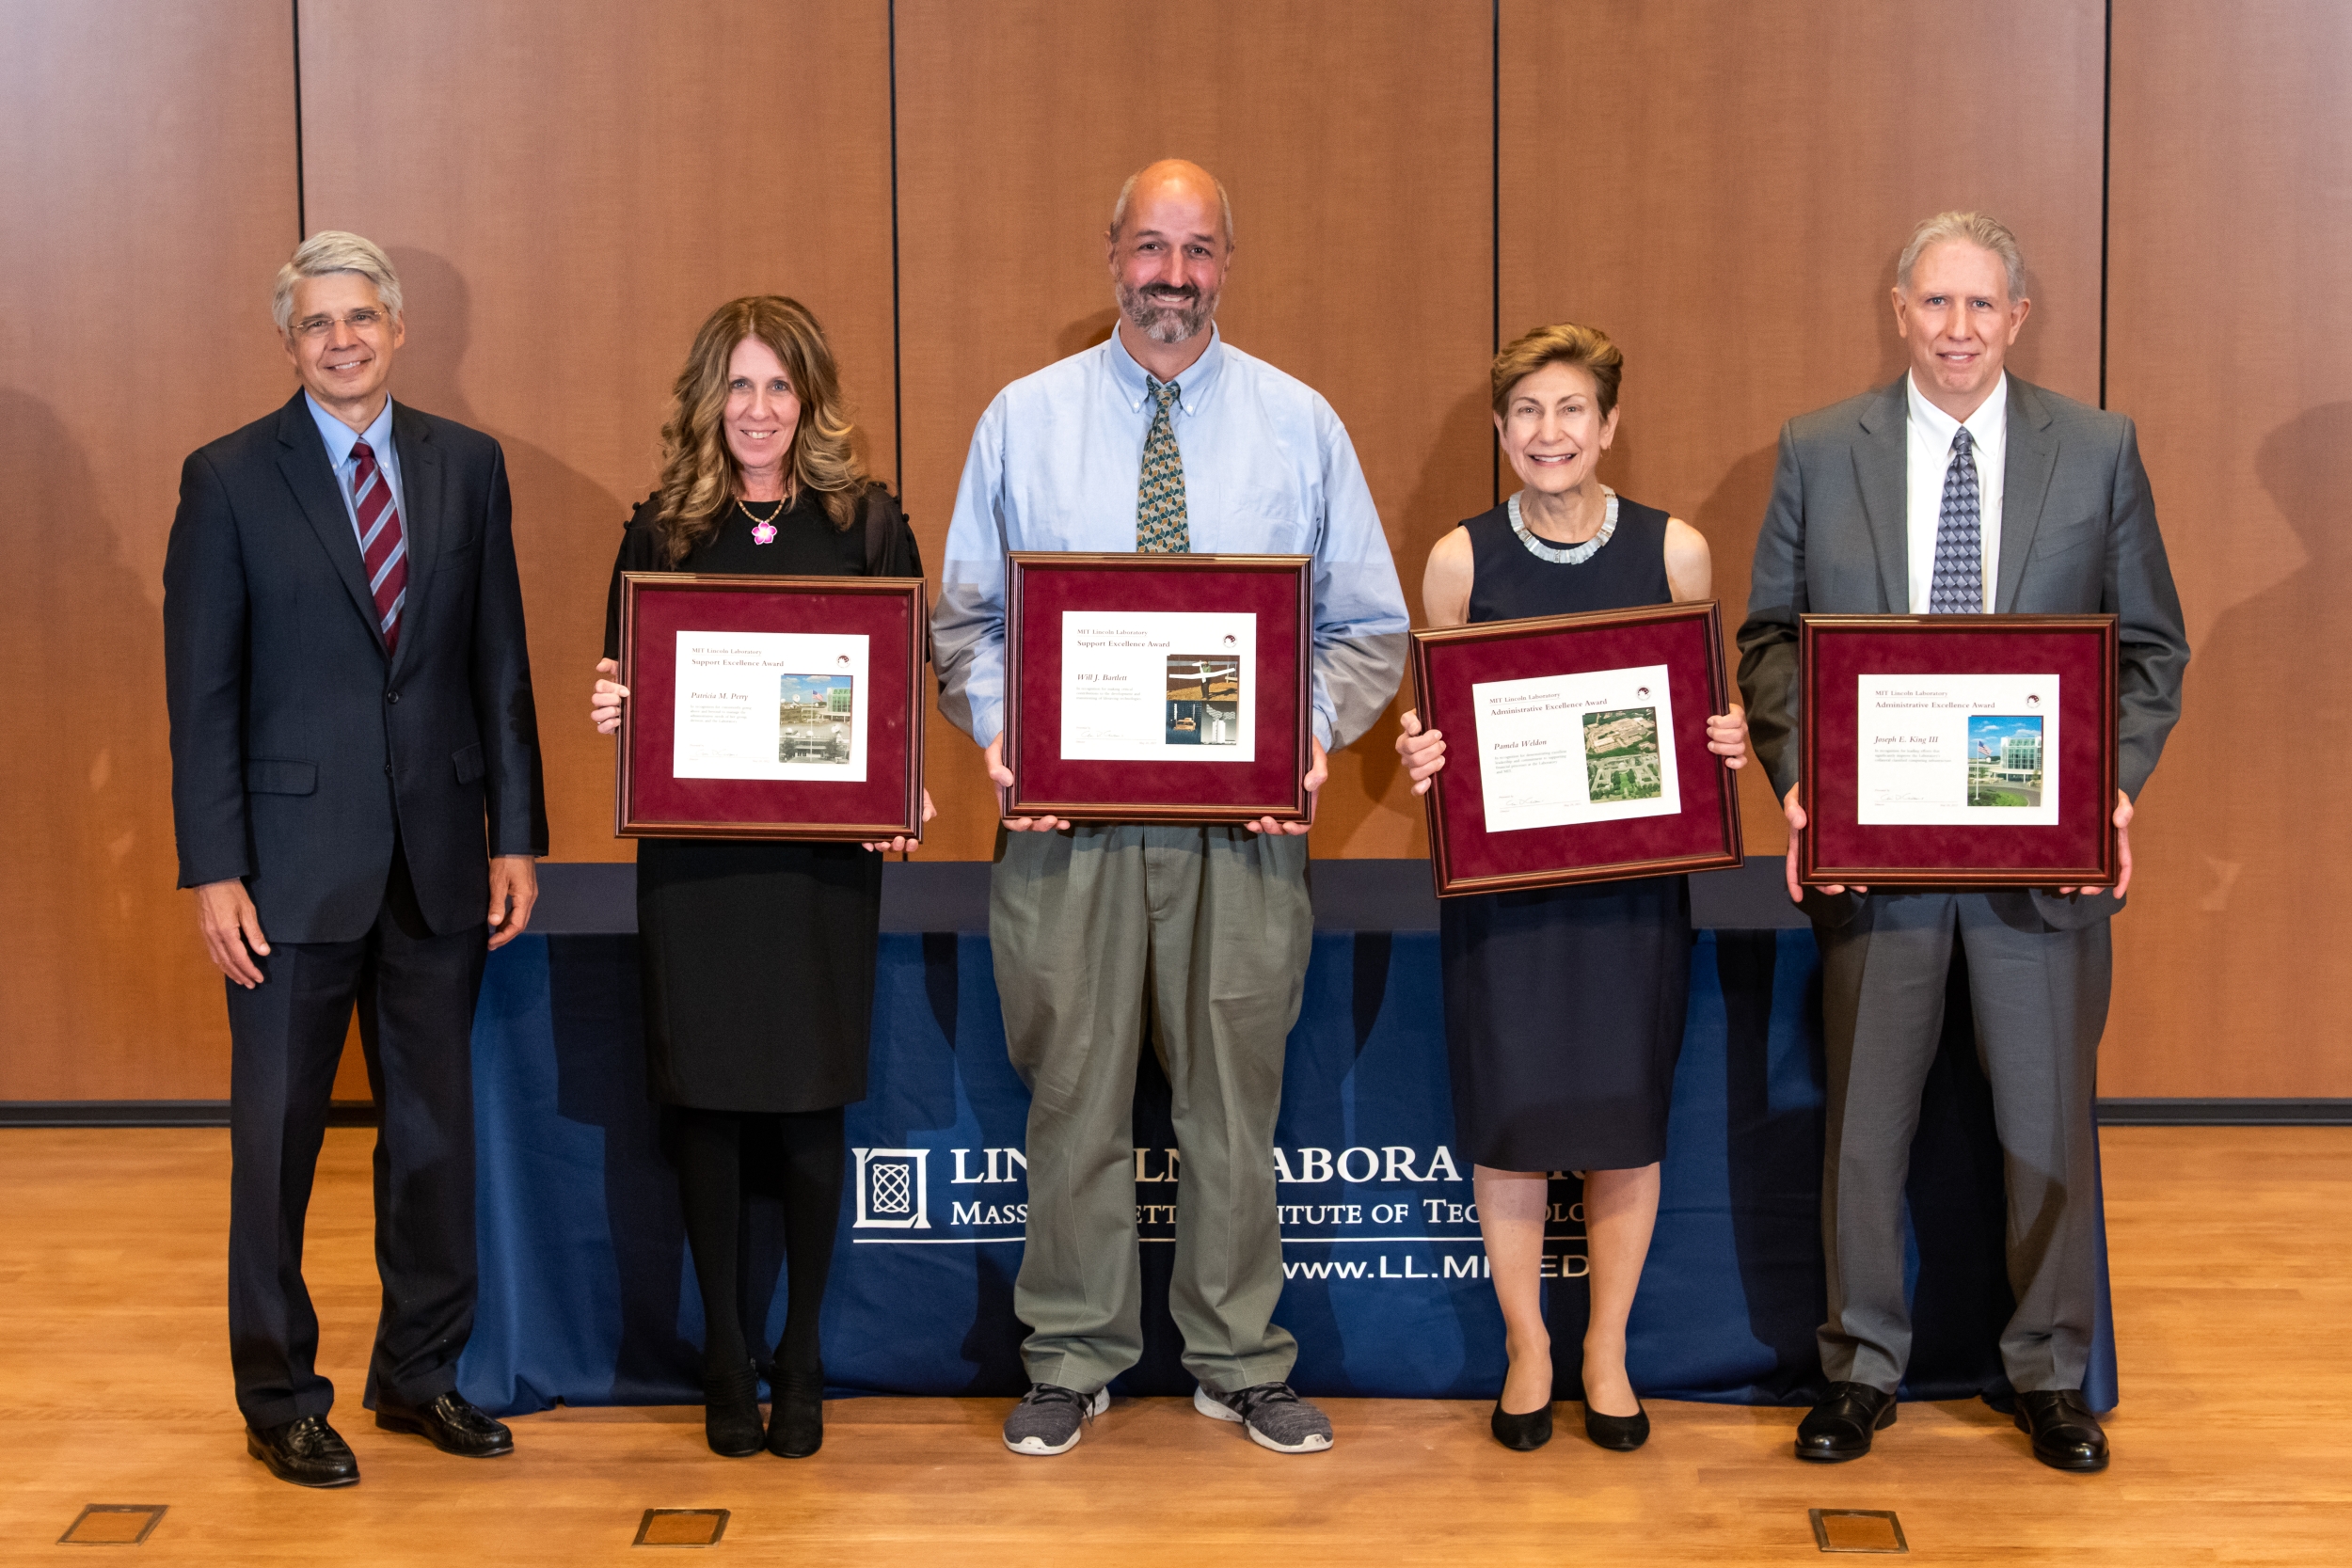 From left to right: Lincoln Laboratory Director Eric Evans and award winners Patricia Perry, Will Bartlett, Pamela Weldon, and Joseph King gathered for a photo at the Administrative and Support Excellence Awards ceremony.